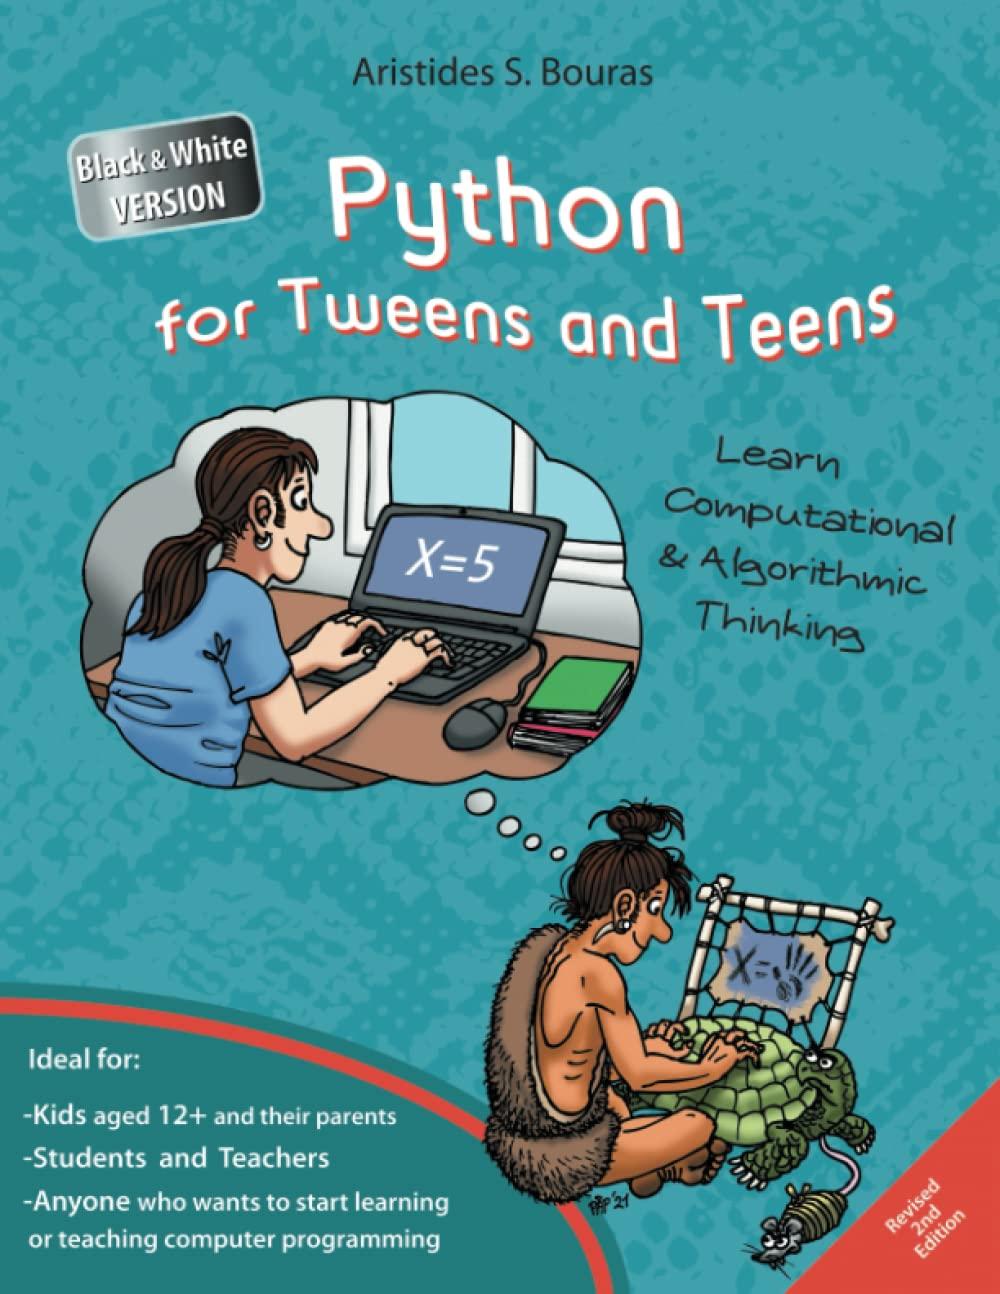 python for tweens and teens learn computational and algorithmic thinking 2nd edition aristides bouras